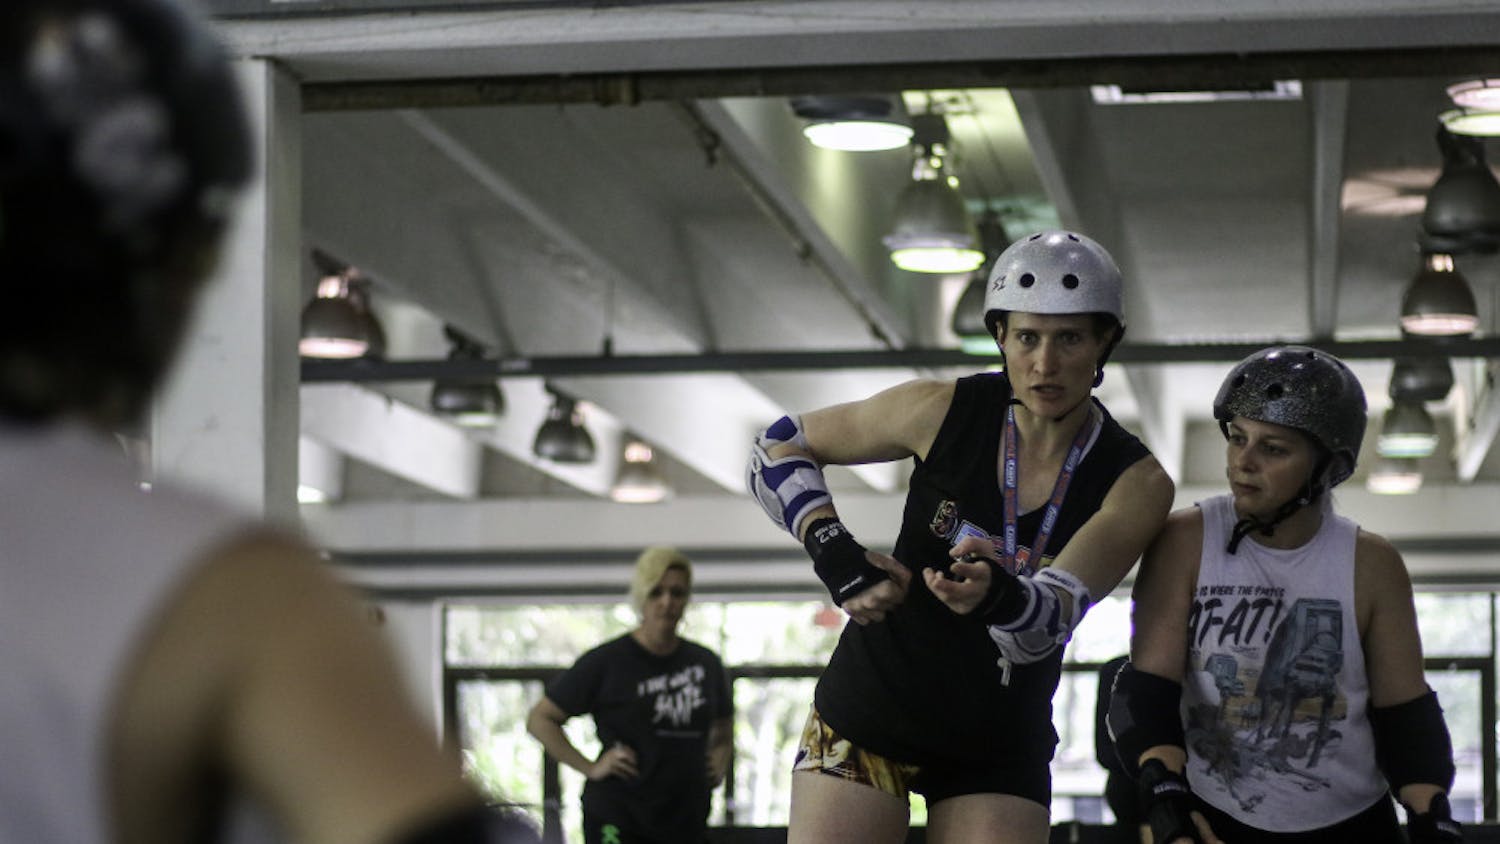 Hillary Buscovick, a 31-year-old professional roller derby skater, works with Lizz Zieschang, 28, to demonstrate blocking techniques at a workshop for local skaters at the Alachua County Fairgrounds on Saturday. “I want every skater and athlete to be the best they can be,” Buscovick said. Buscovick, who goes by Scald Eagle when playing, has played competitively since 2011 and currently plays for the Denver Roller Derby Mile High Club team. 